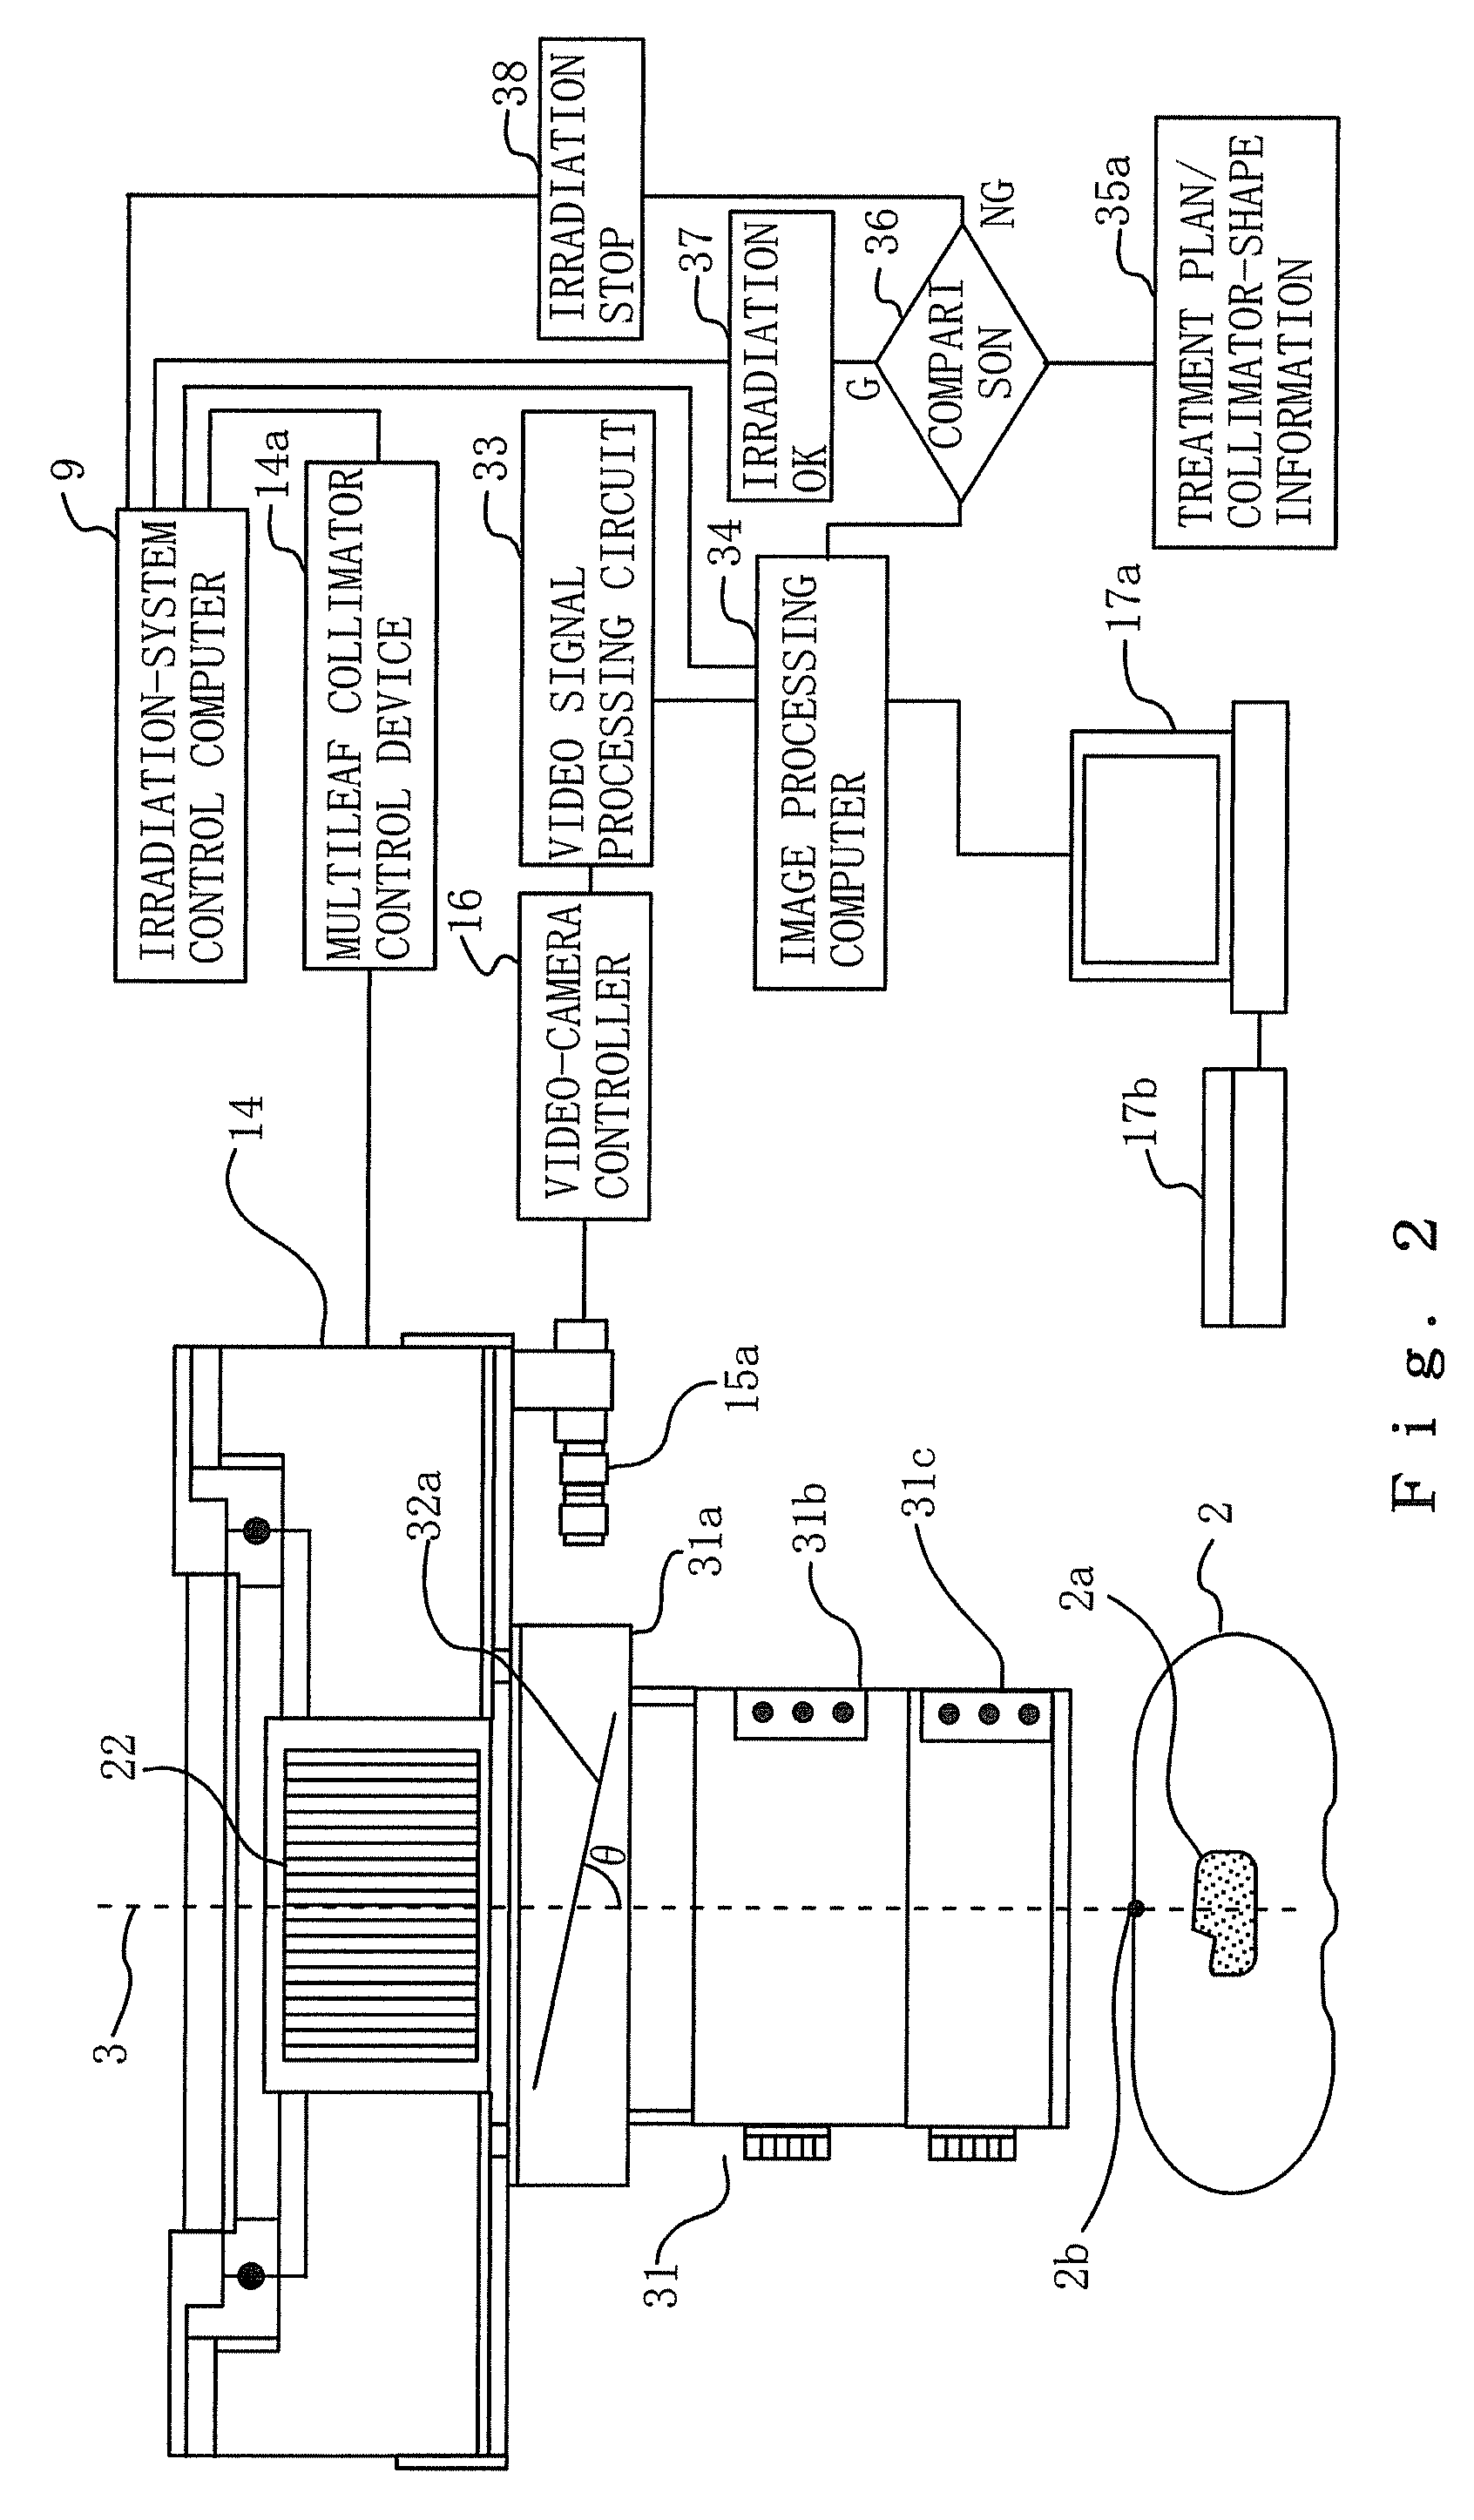 Particle-beam treatment system